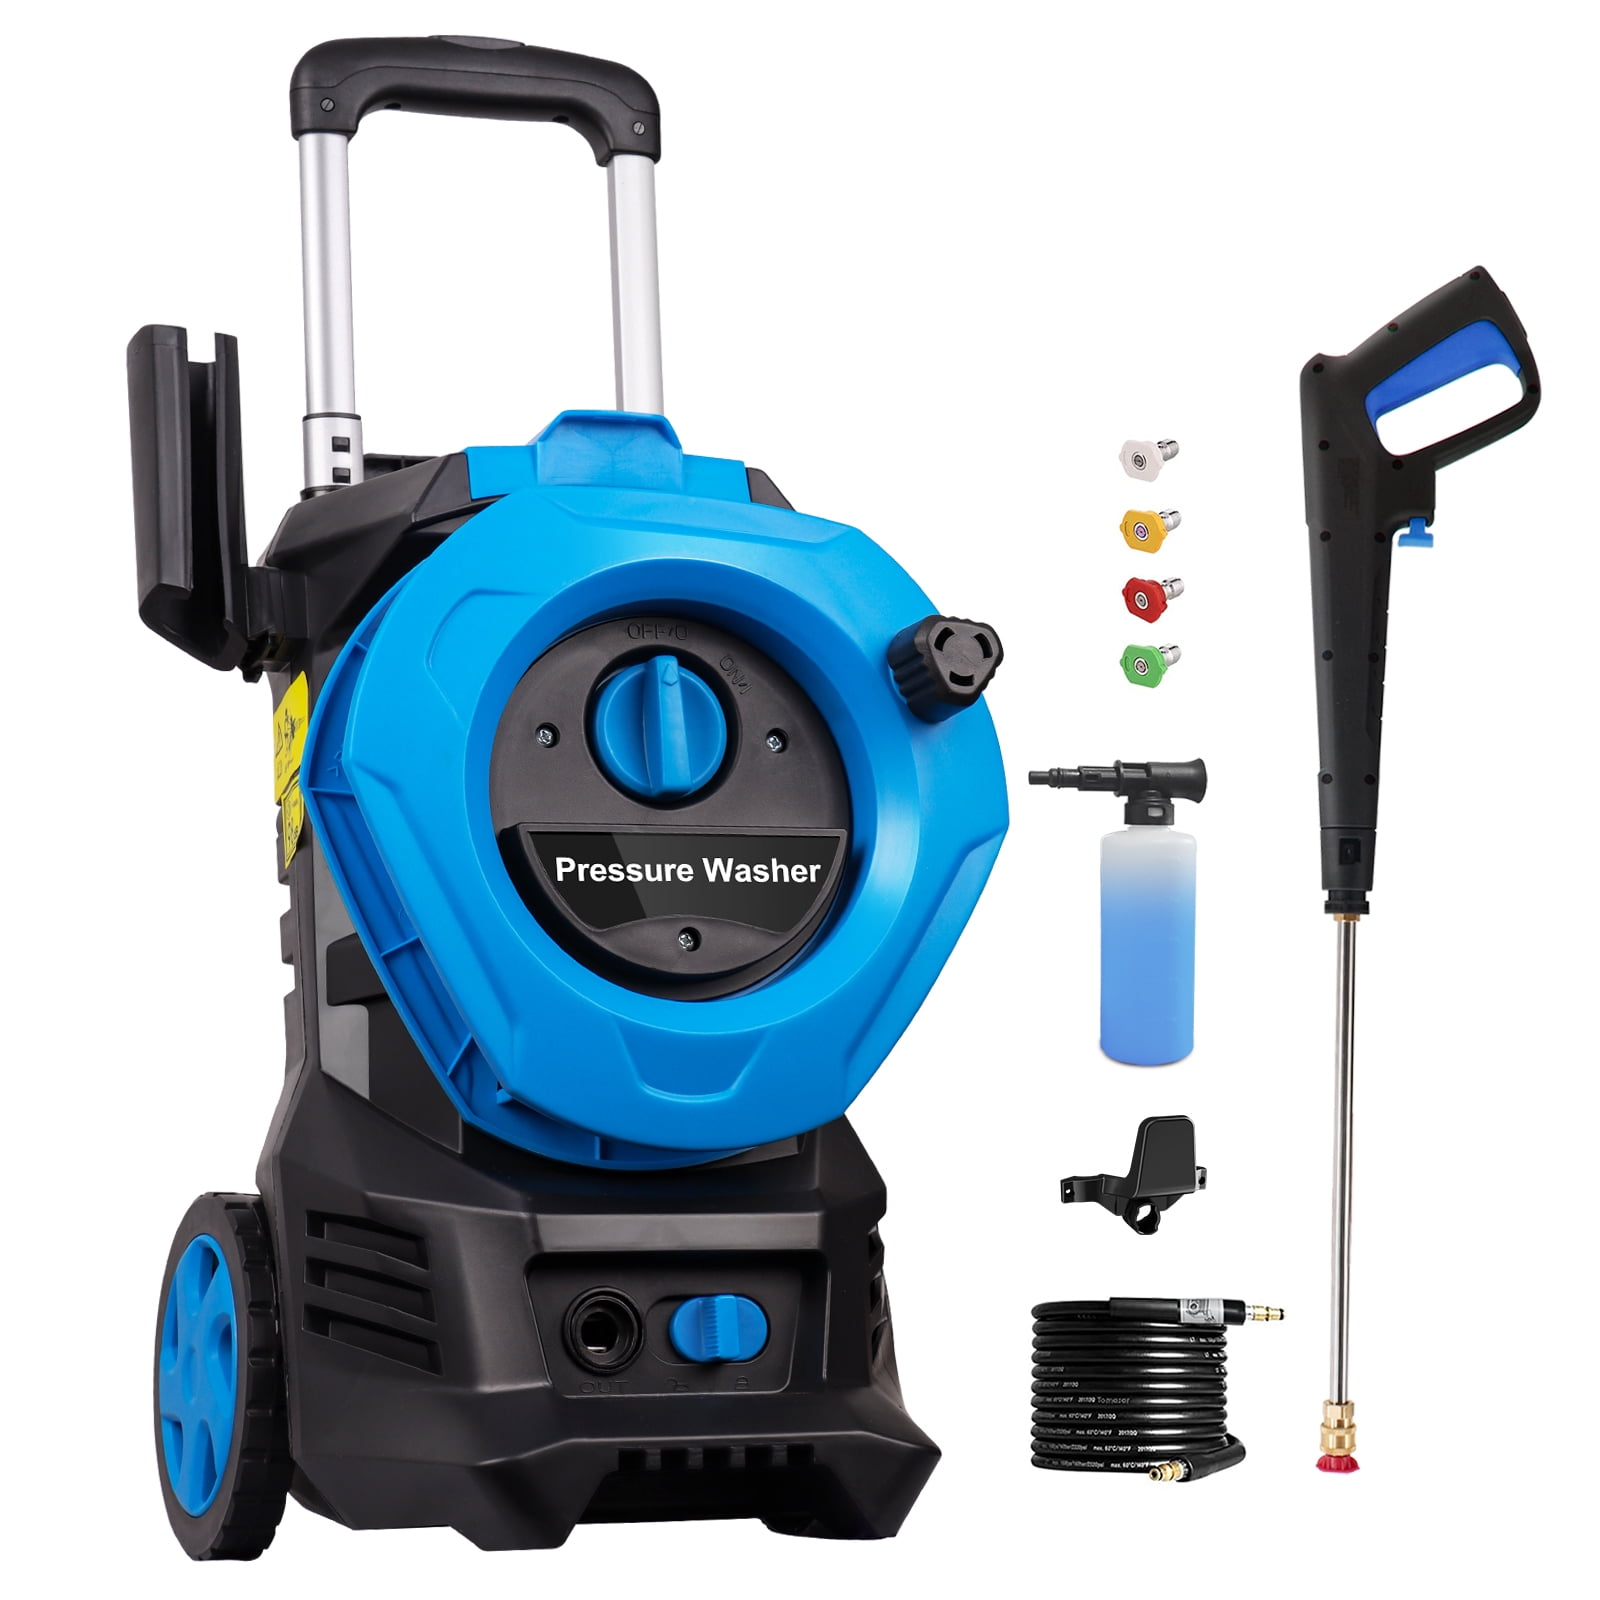  Pecticho Electric Pressure Washer - 4000PSI Max 2.8 GPM Power  Washer with Smart Control and 3 Levels of Adjustment, 4 Nozzles, Foam  Cannon and Spray Gun for Effortlessly Cleaning Cars